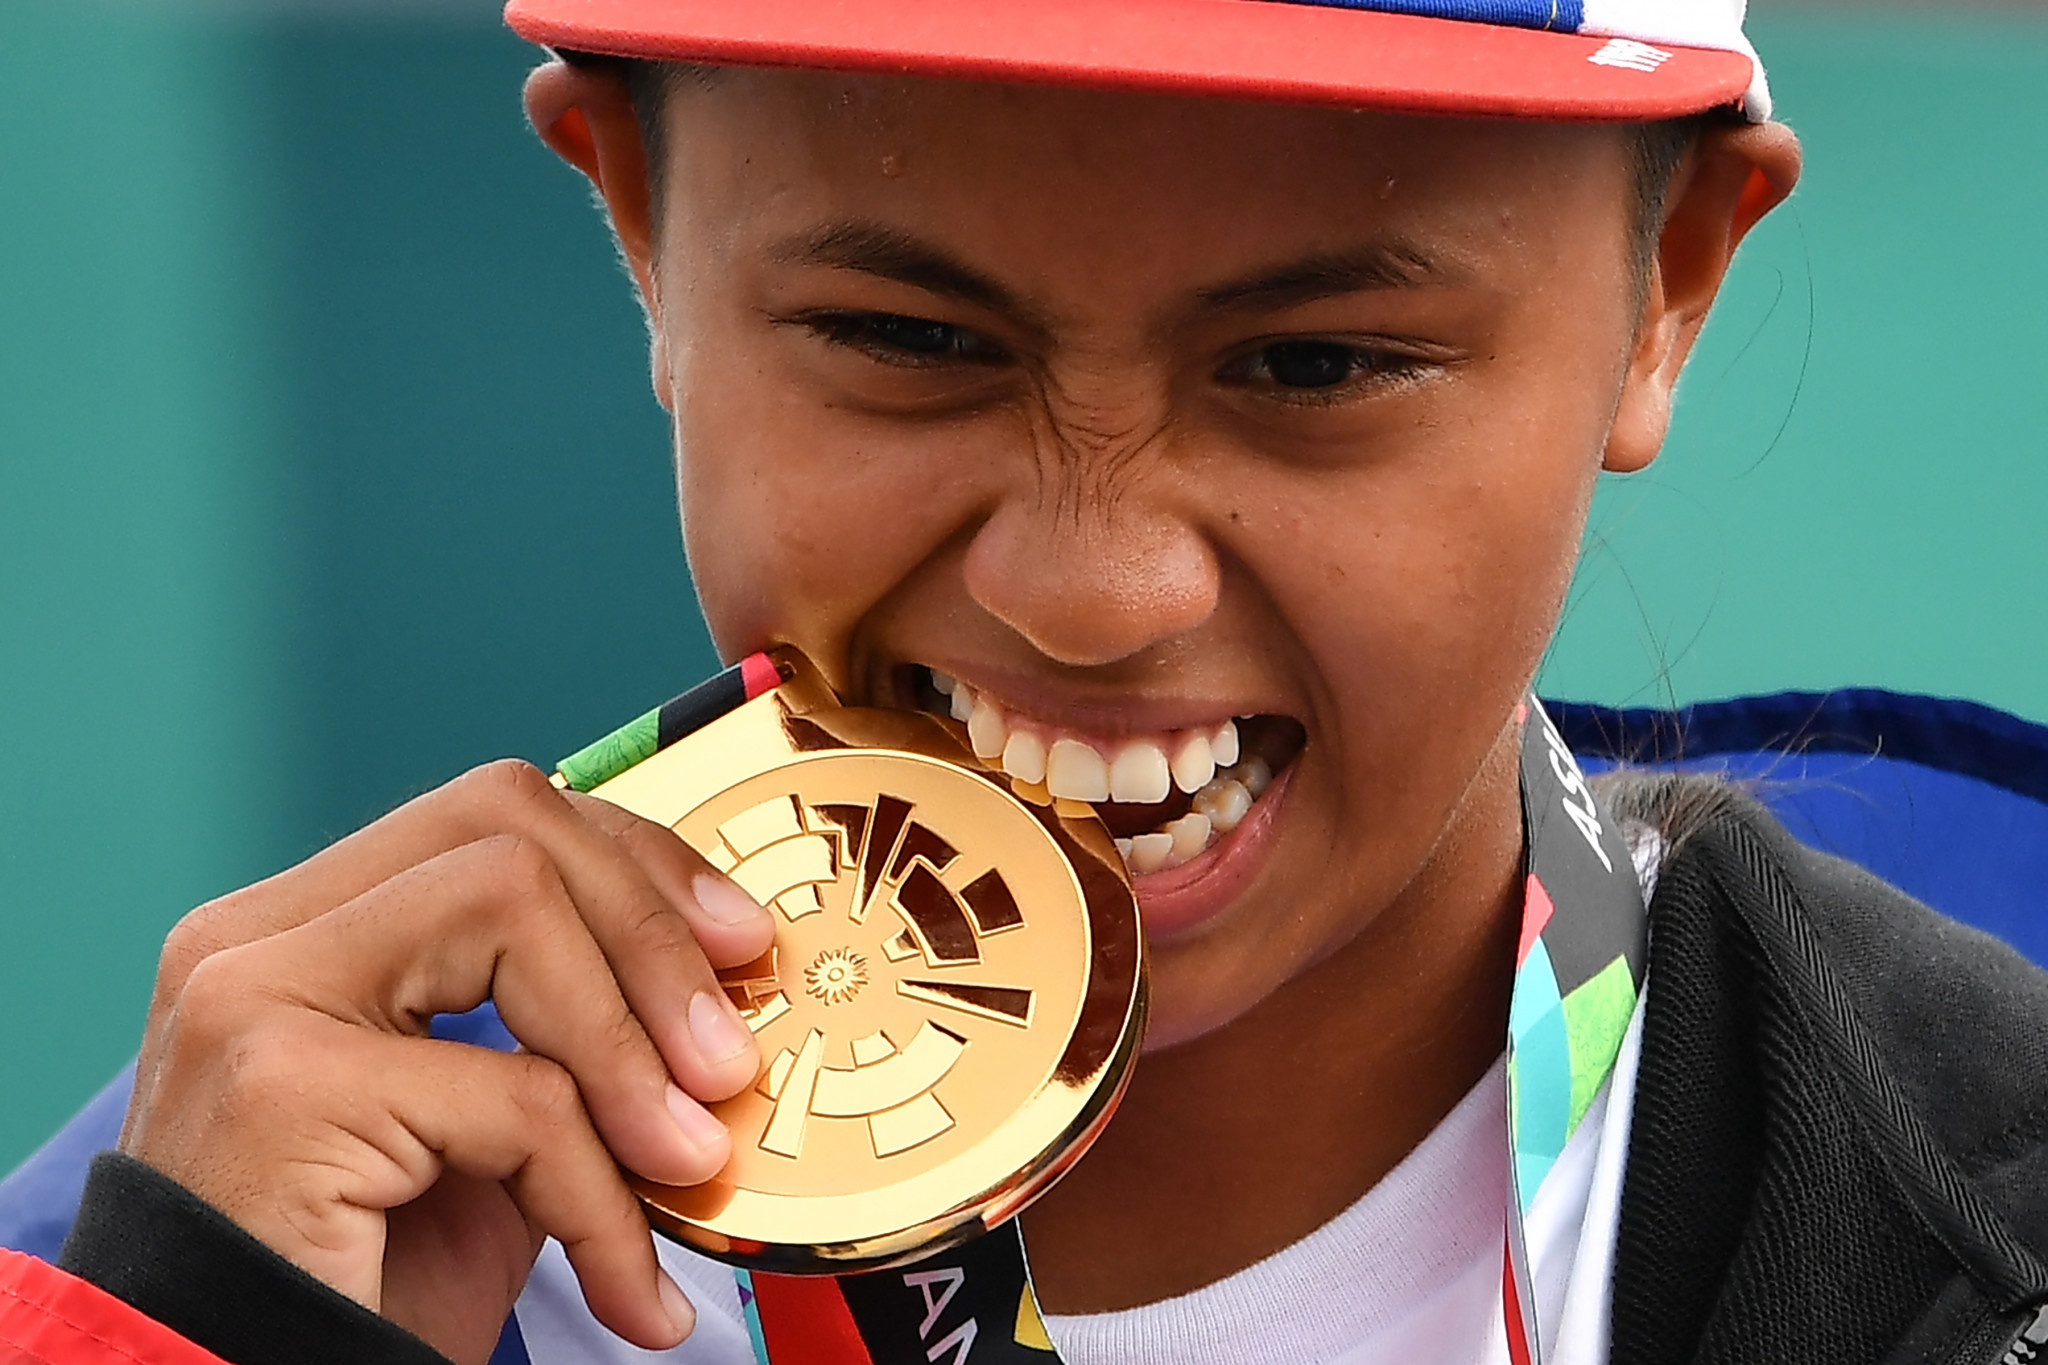 Asian Games champion among those recognised by continent's first skateboard awards